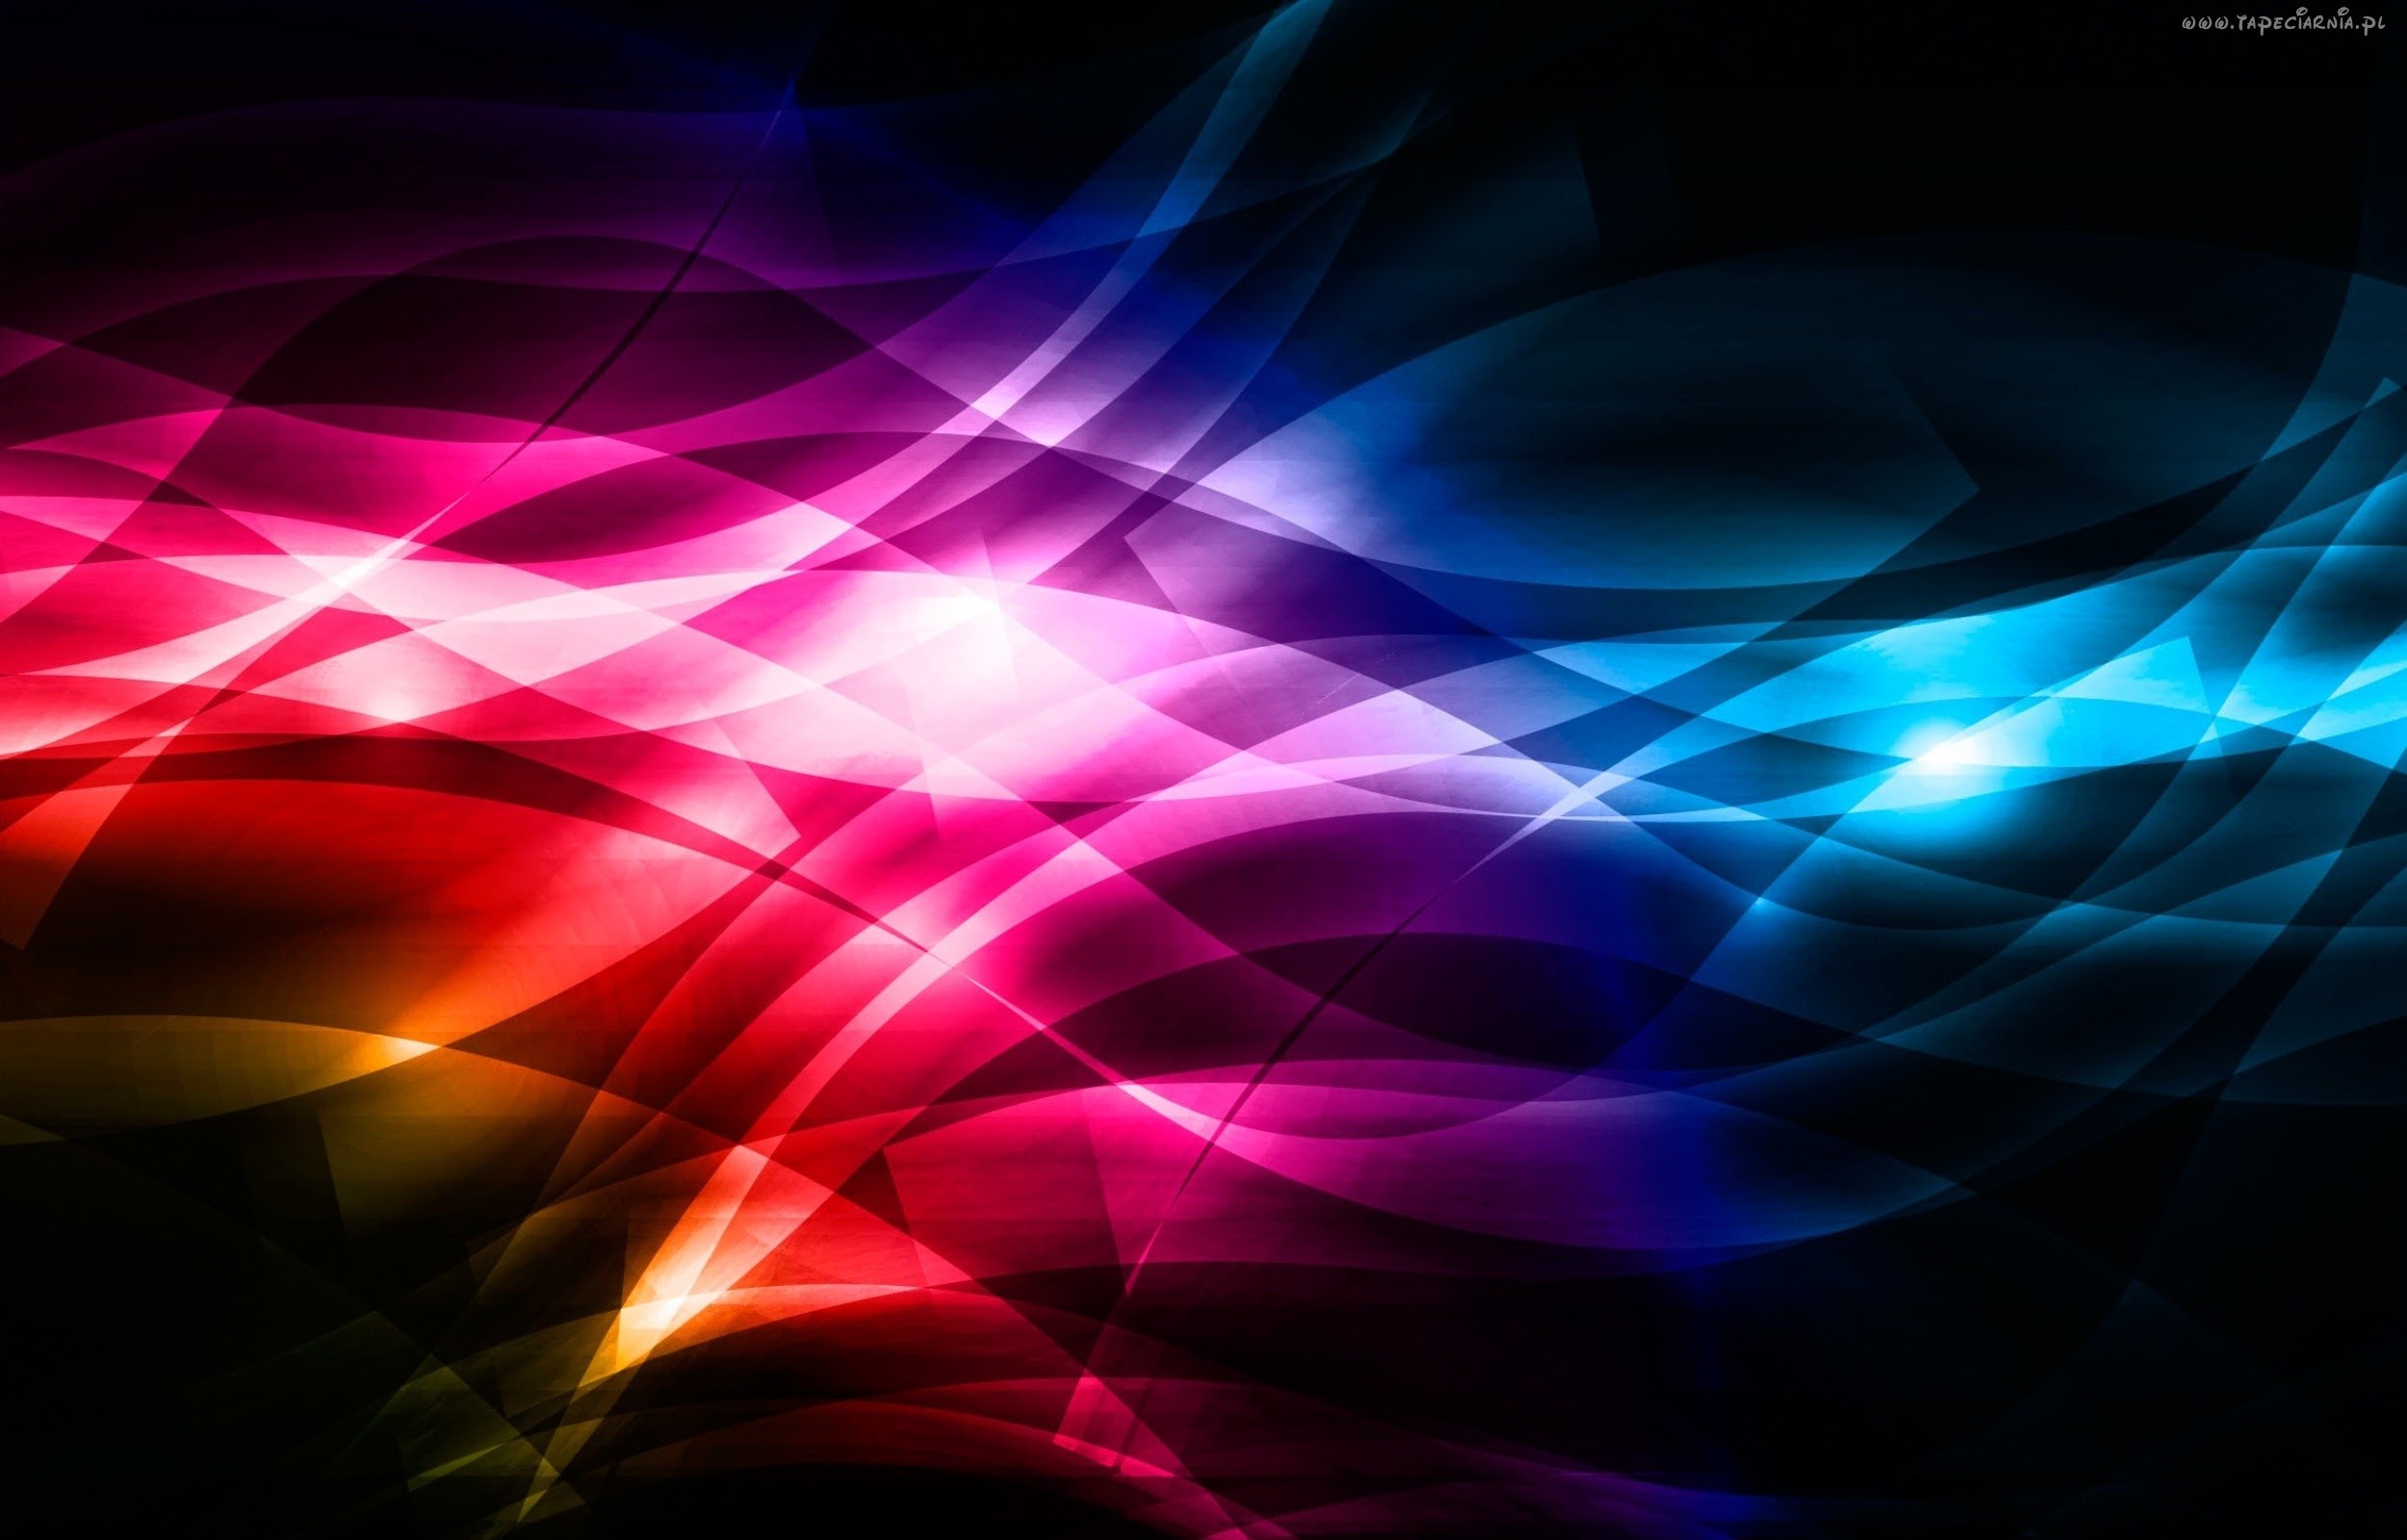 2500x1600 Explore Colorful Wallpaper, Colorful Backgrounds, and more!